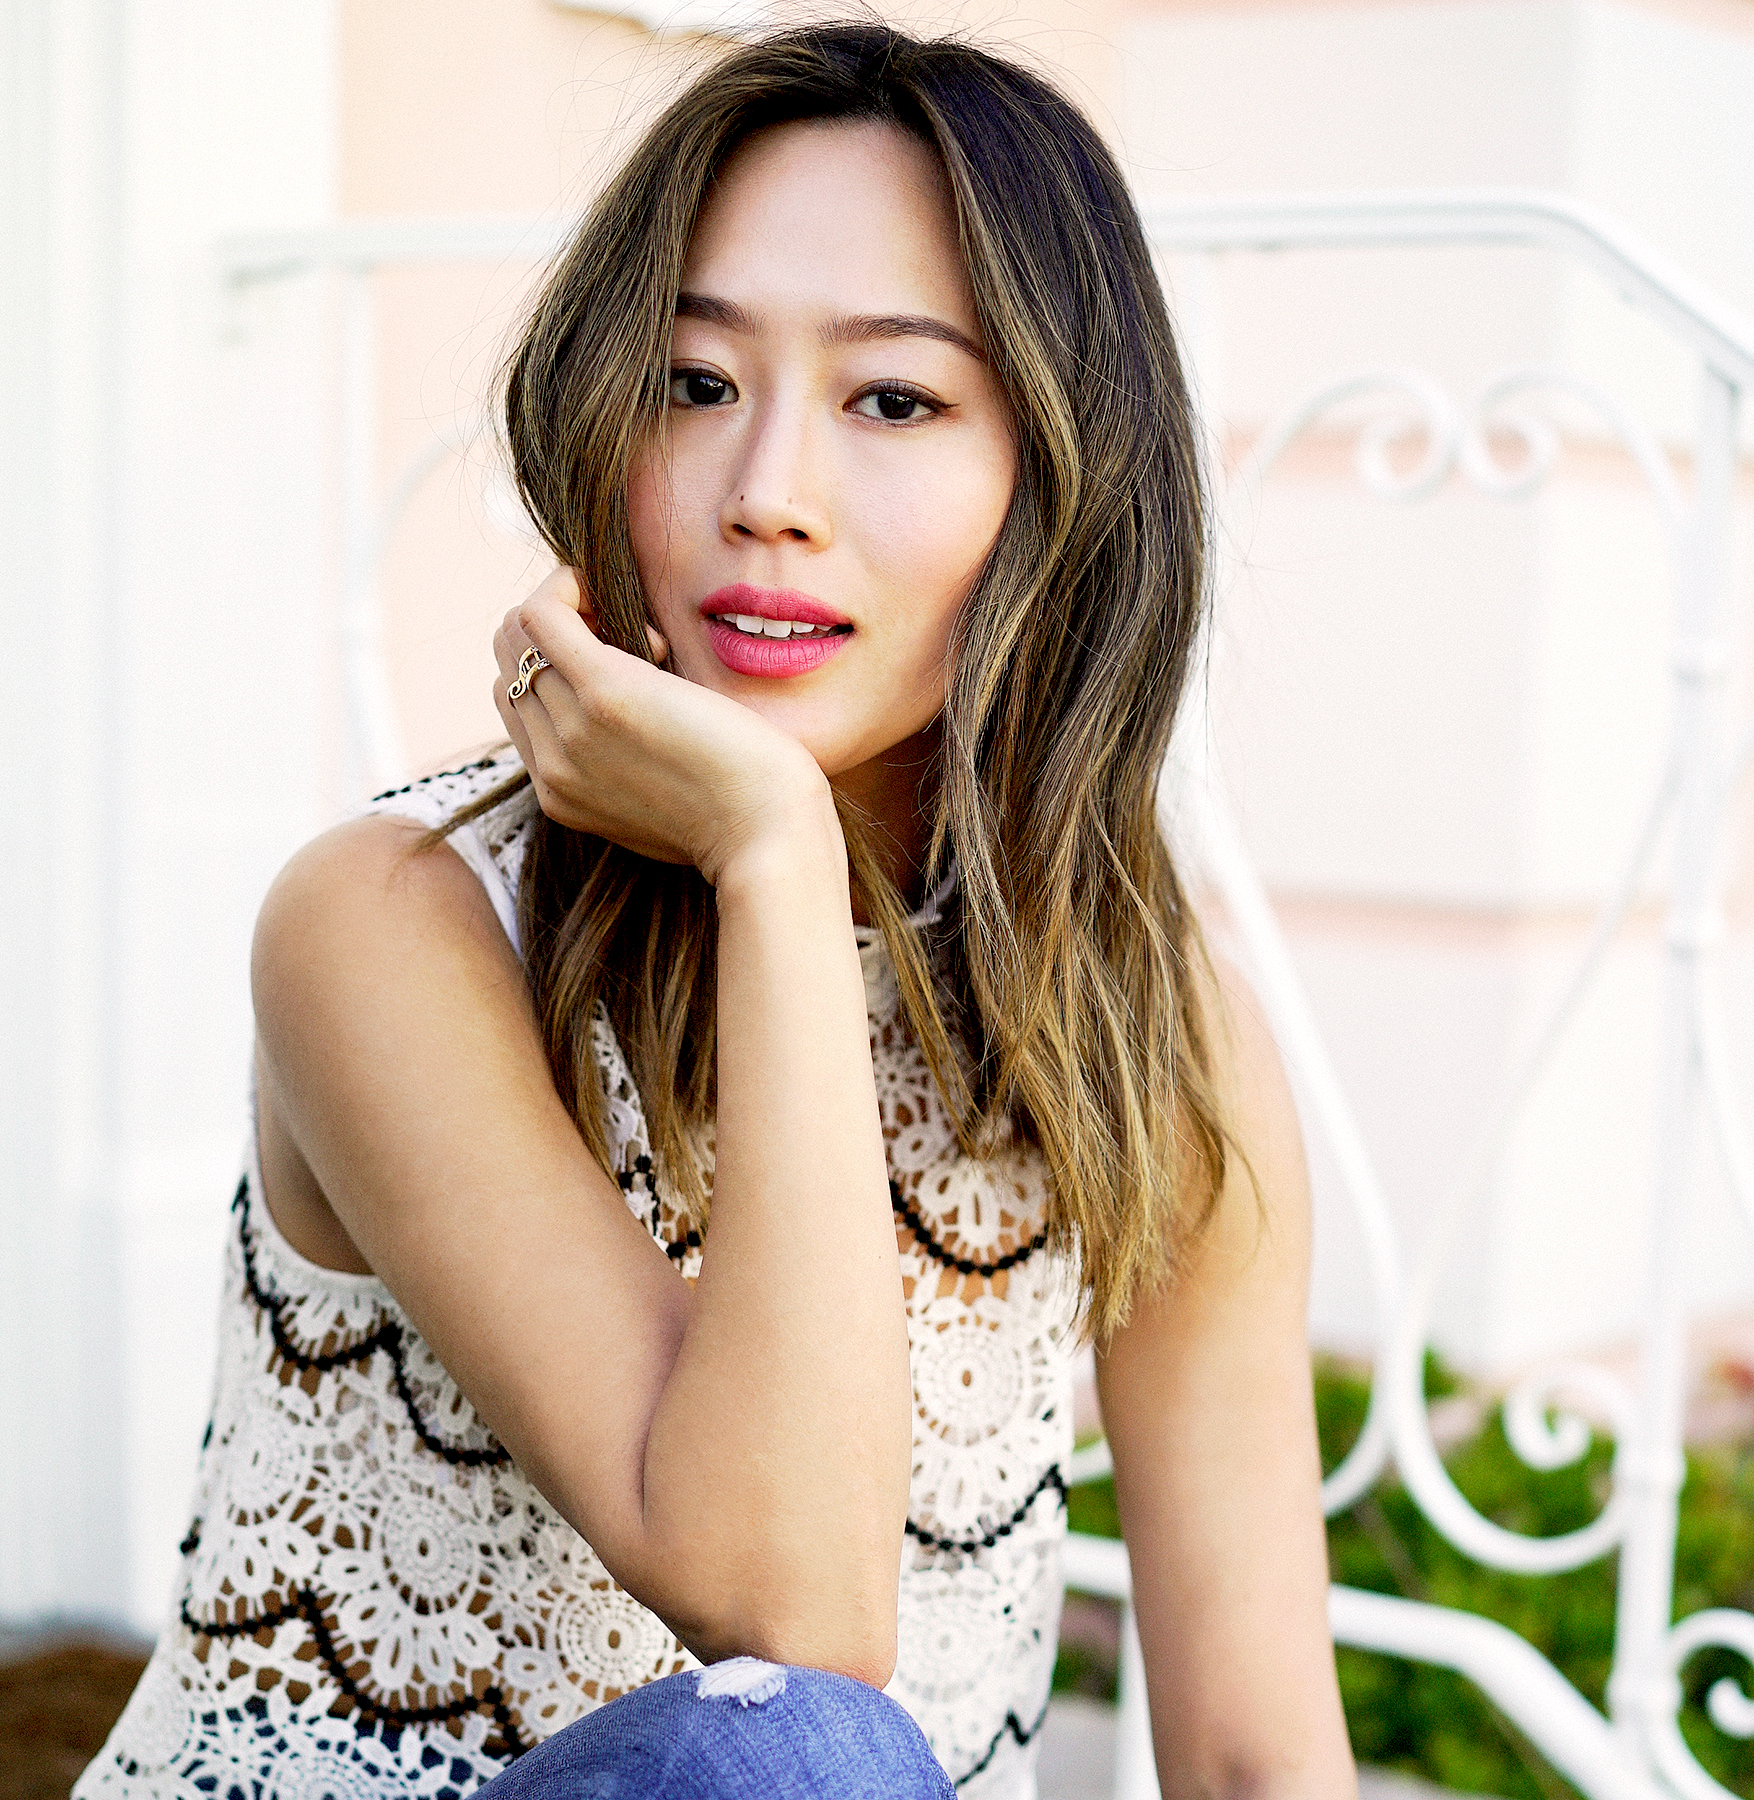 Song of Style Blogger Aimee Song Reveals How She Stays Productive